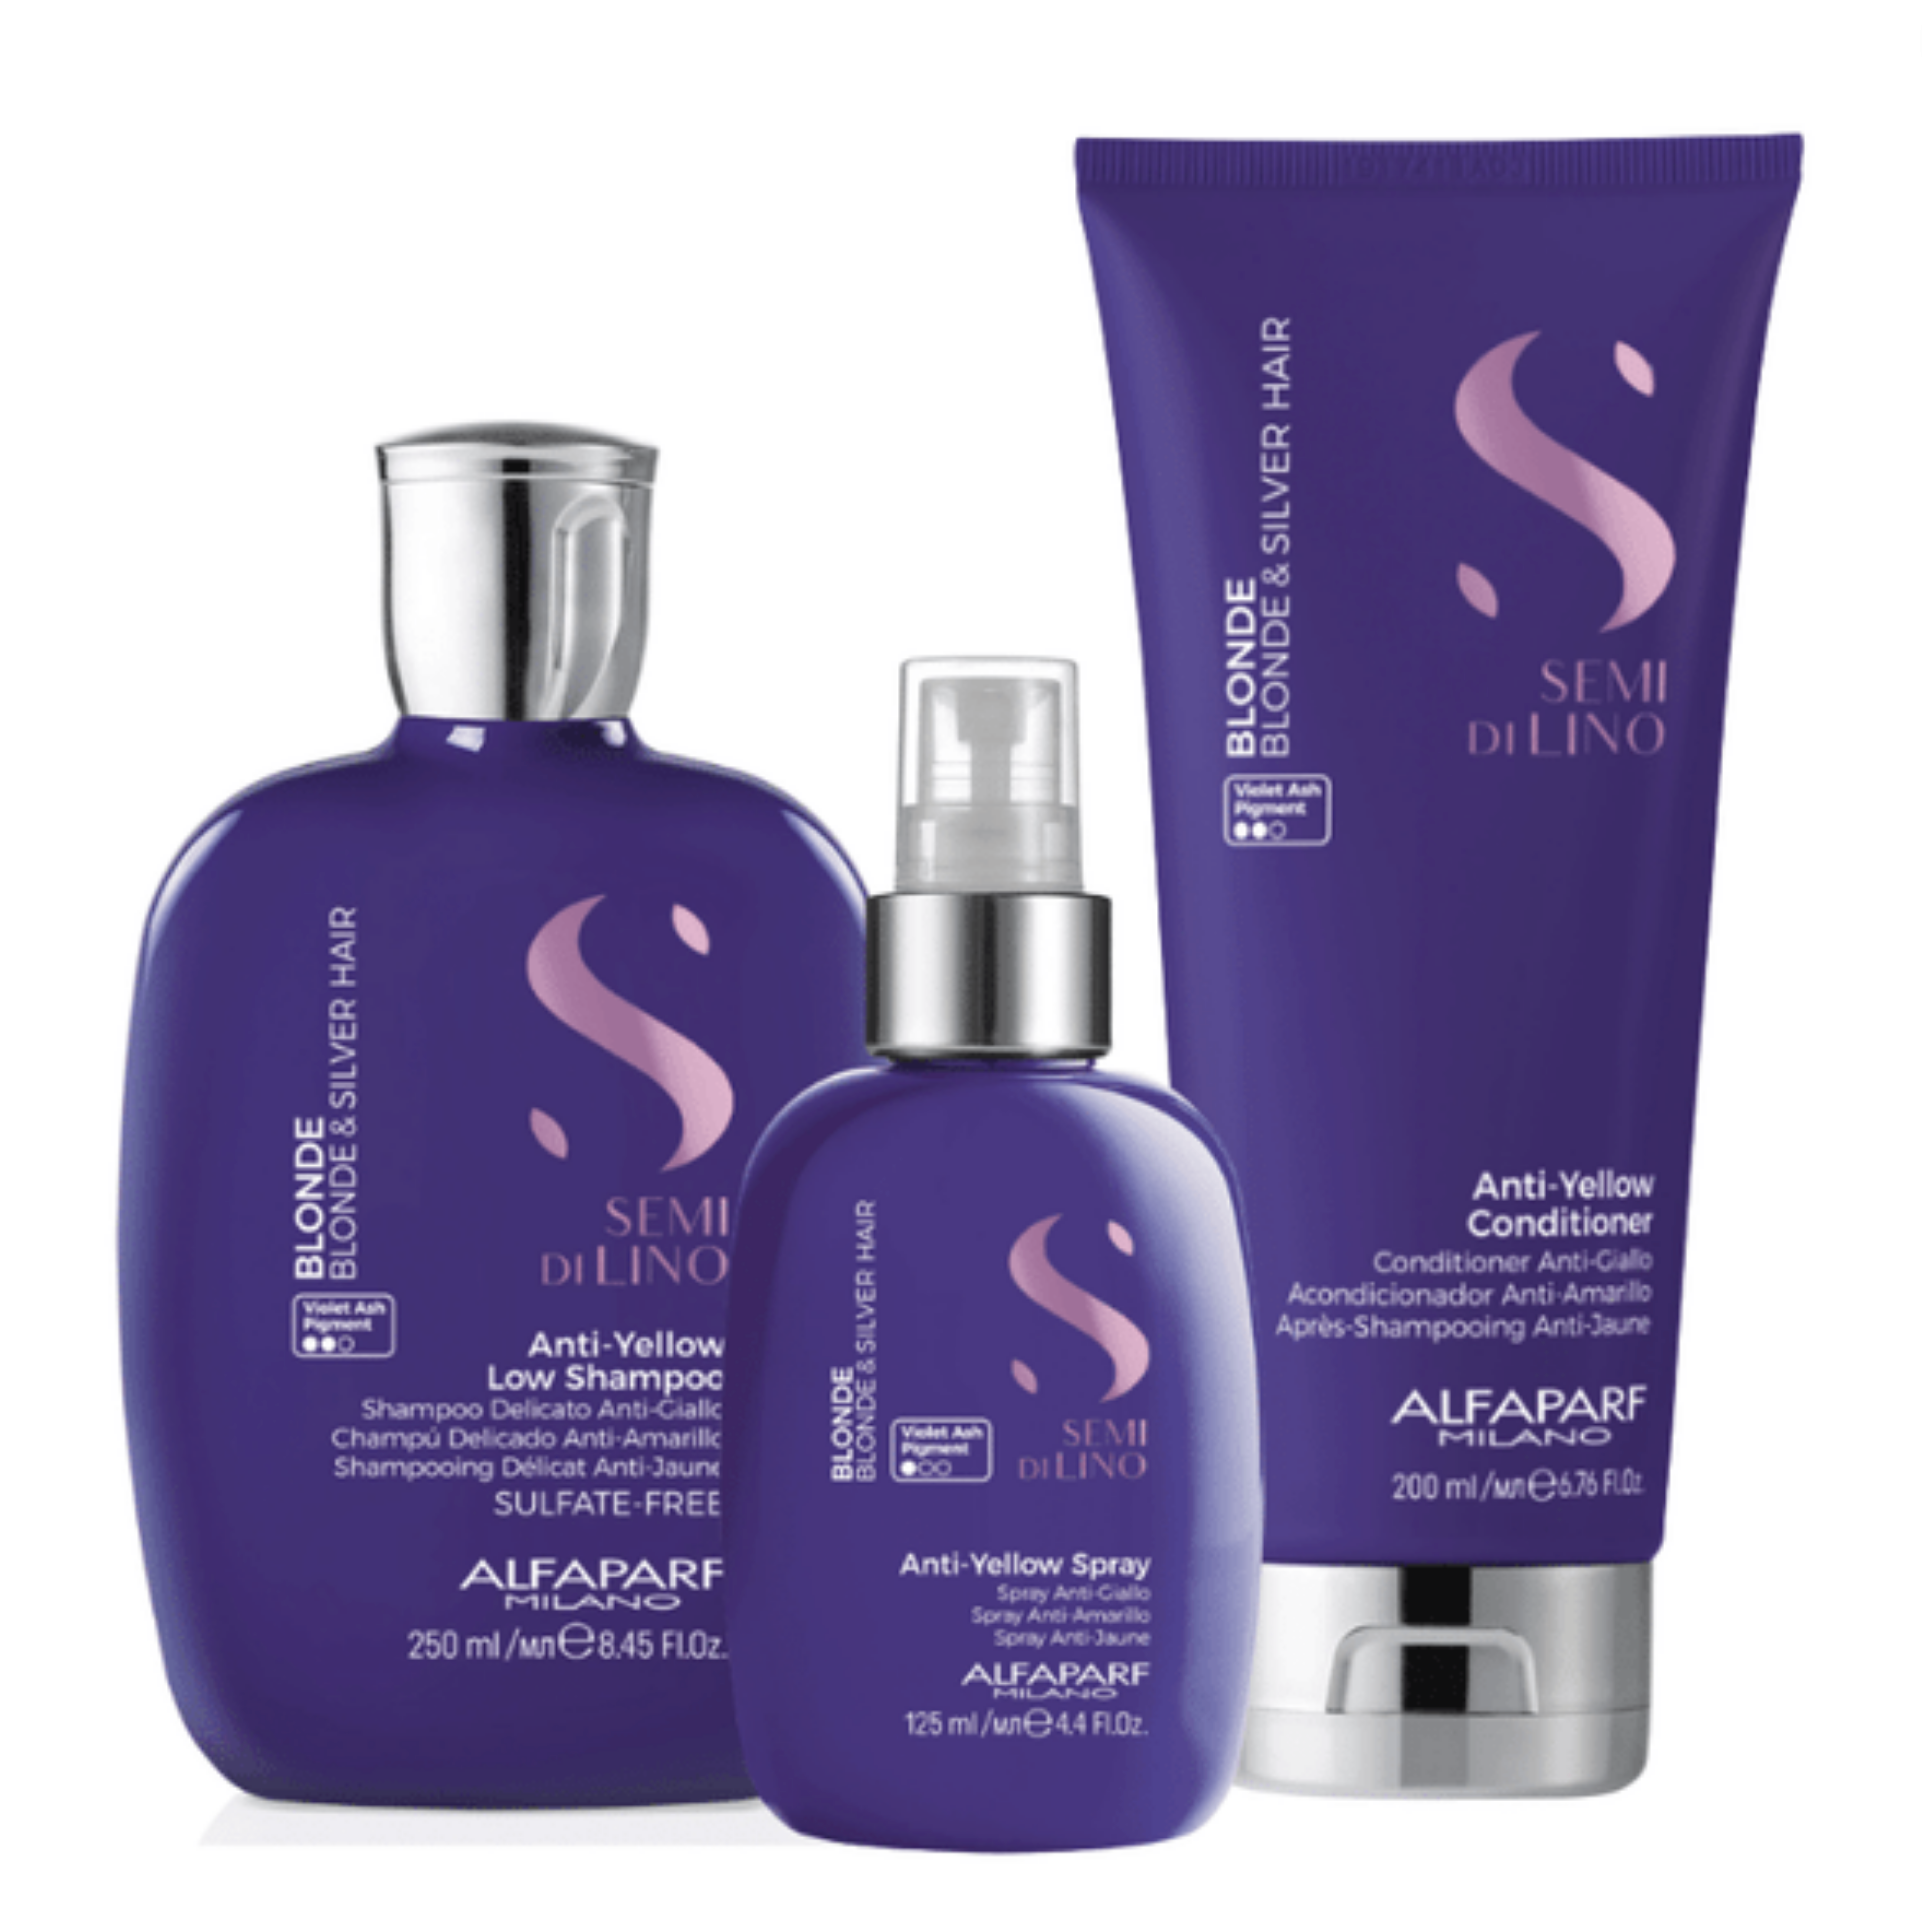 Alfaparf Milano Blonde Gift Set, products